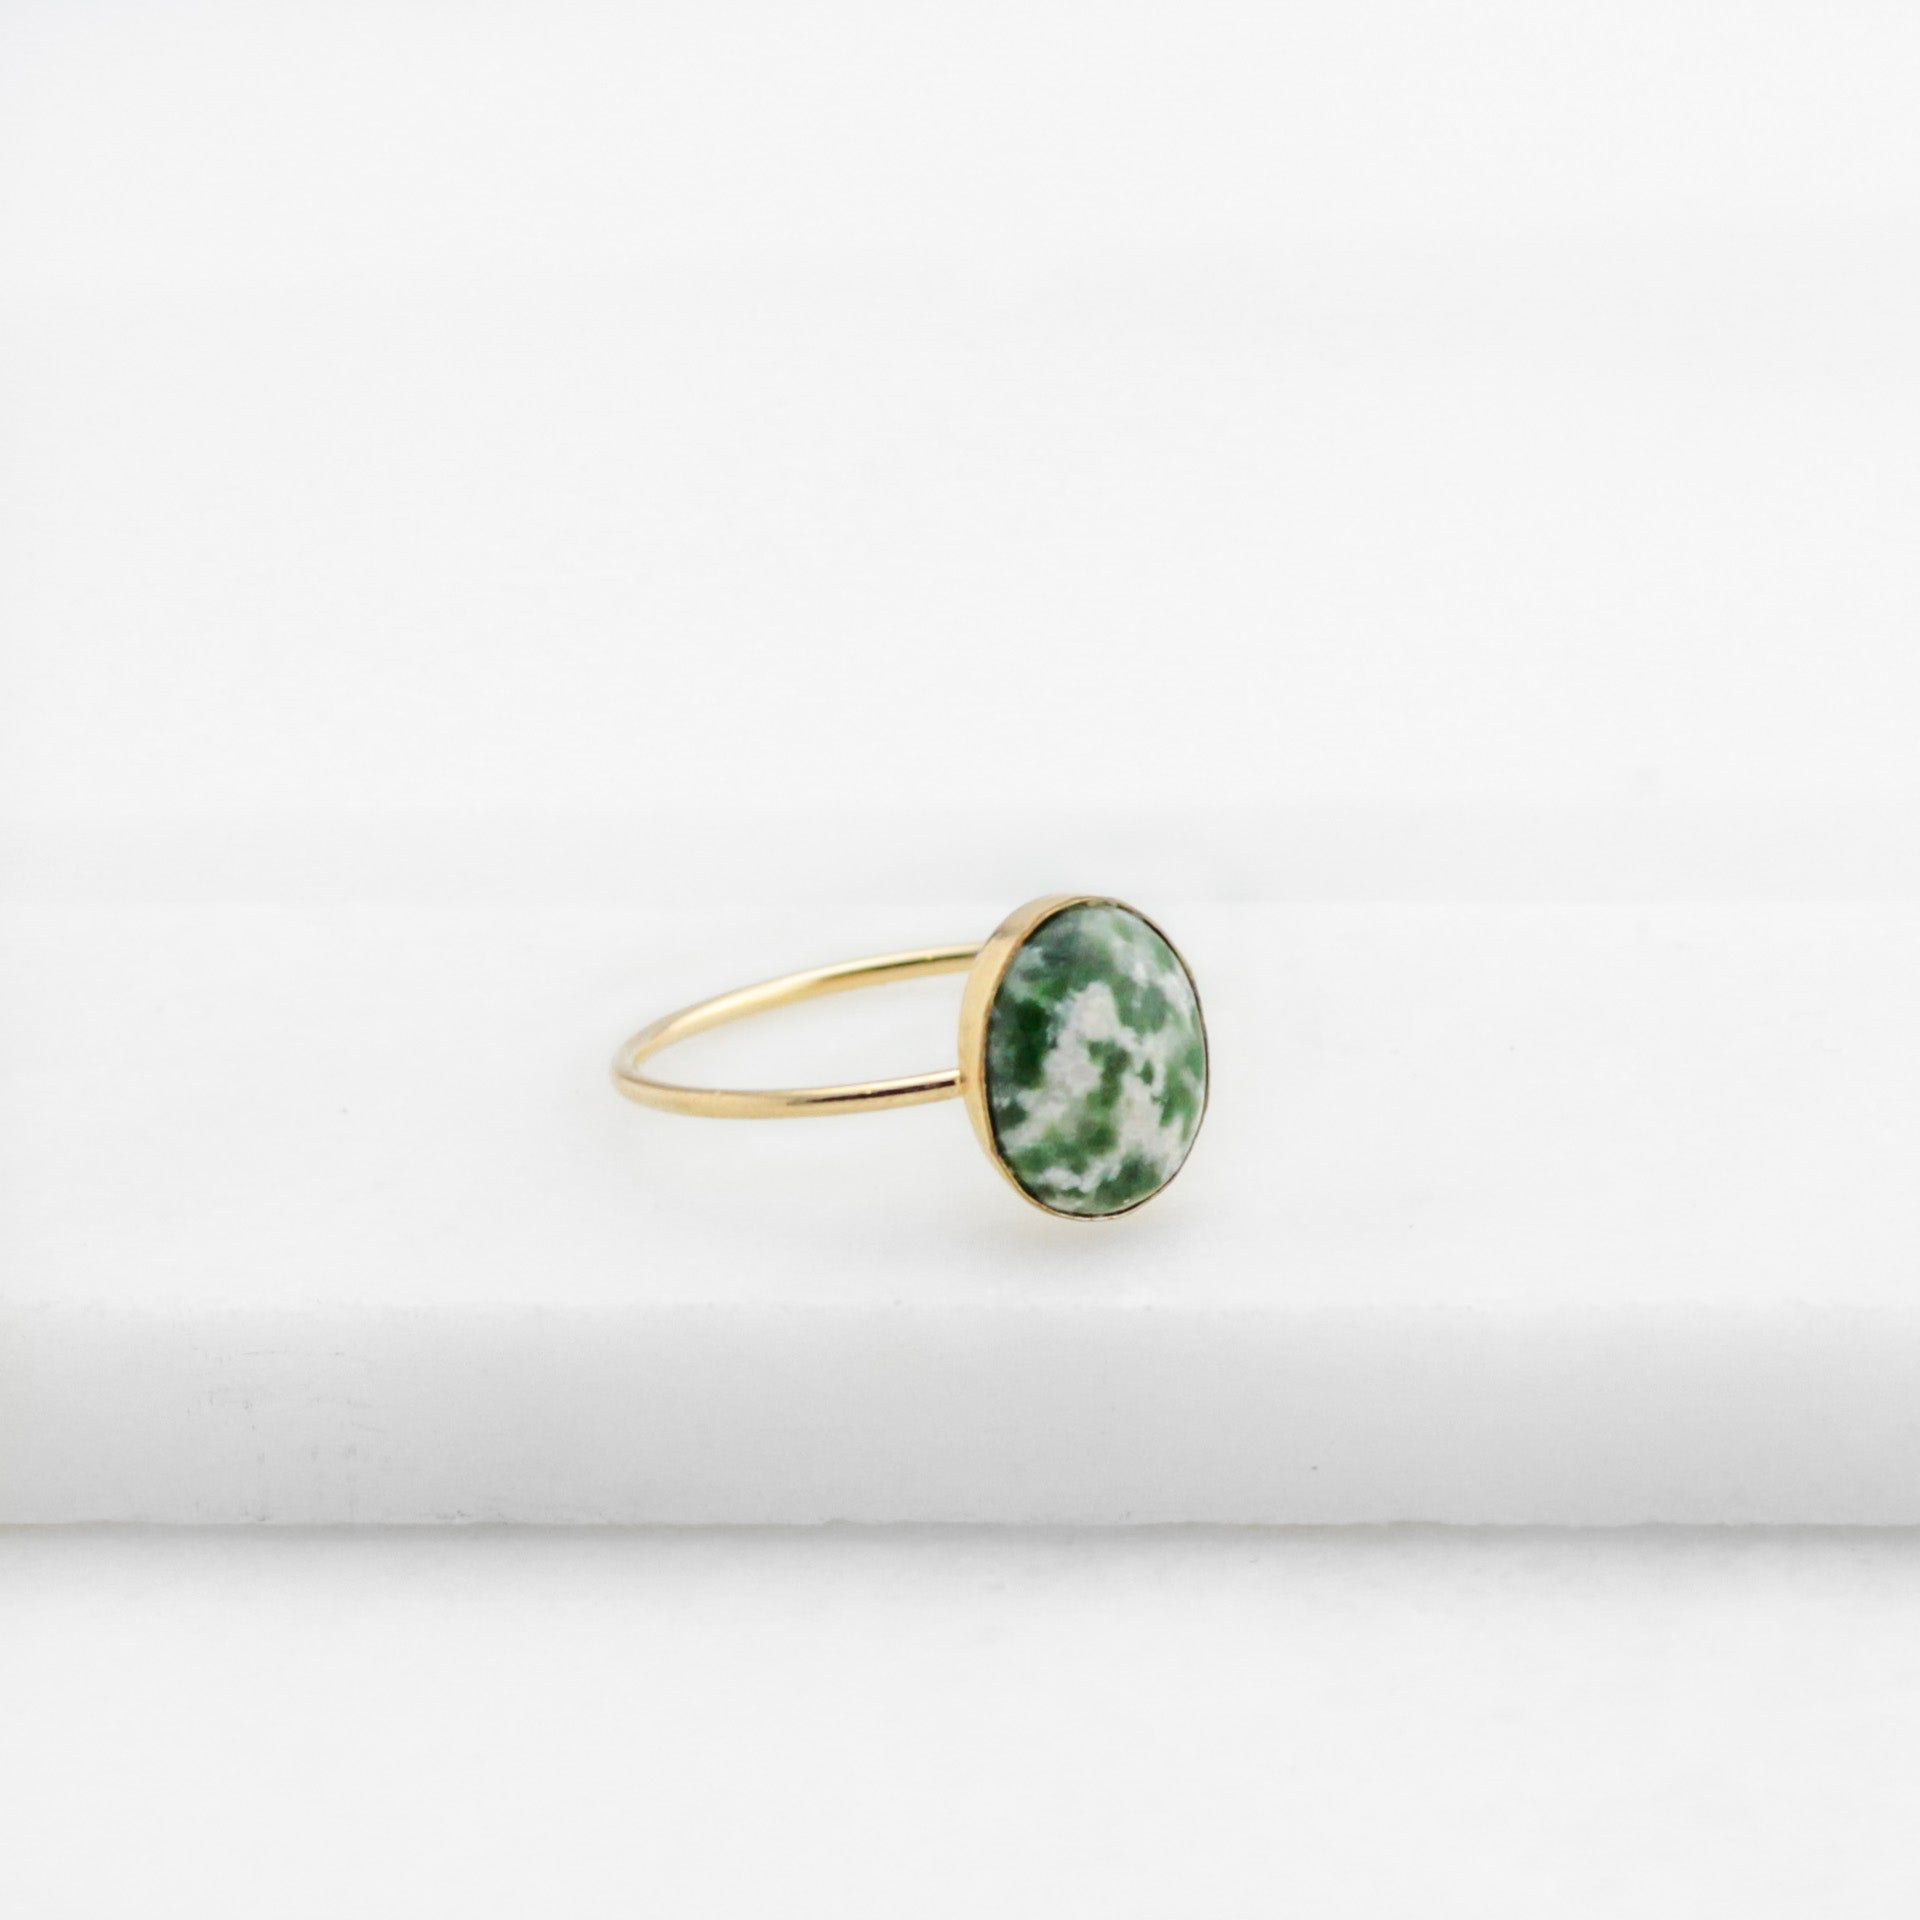 Minimalist Gold Rings and Gemstone Rings